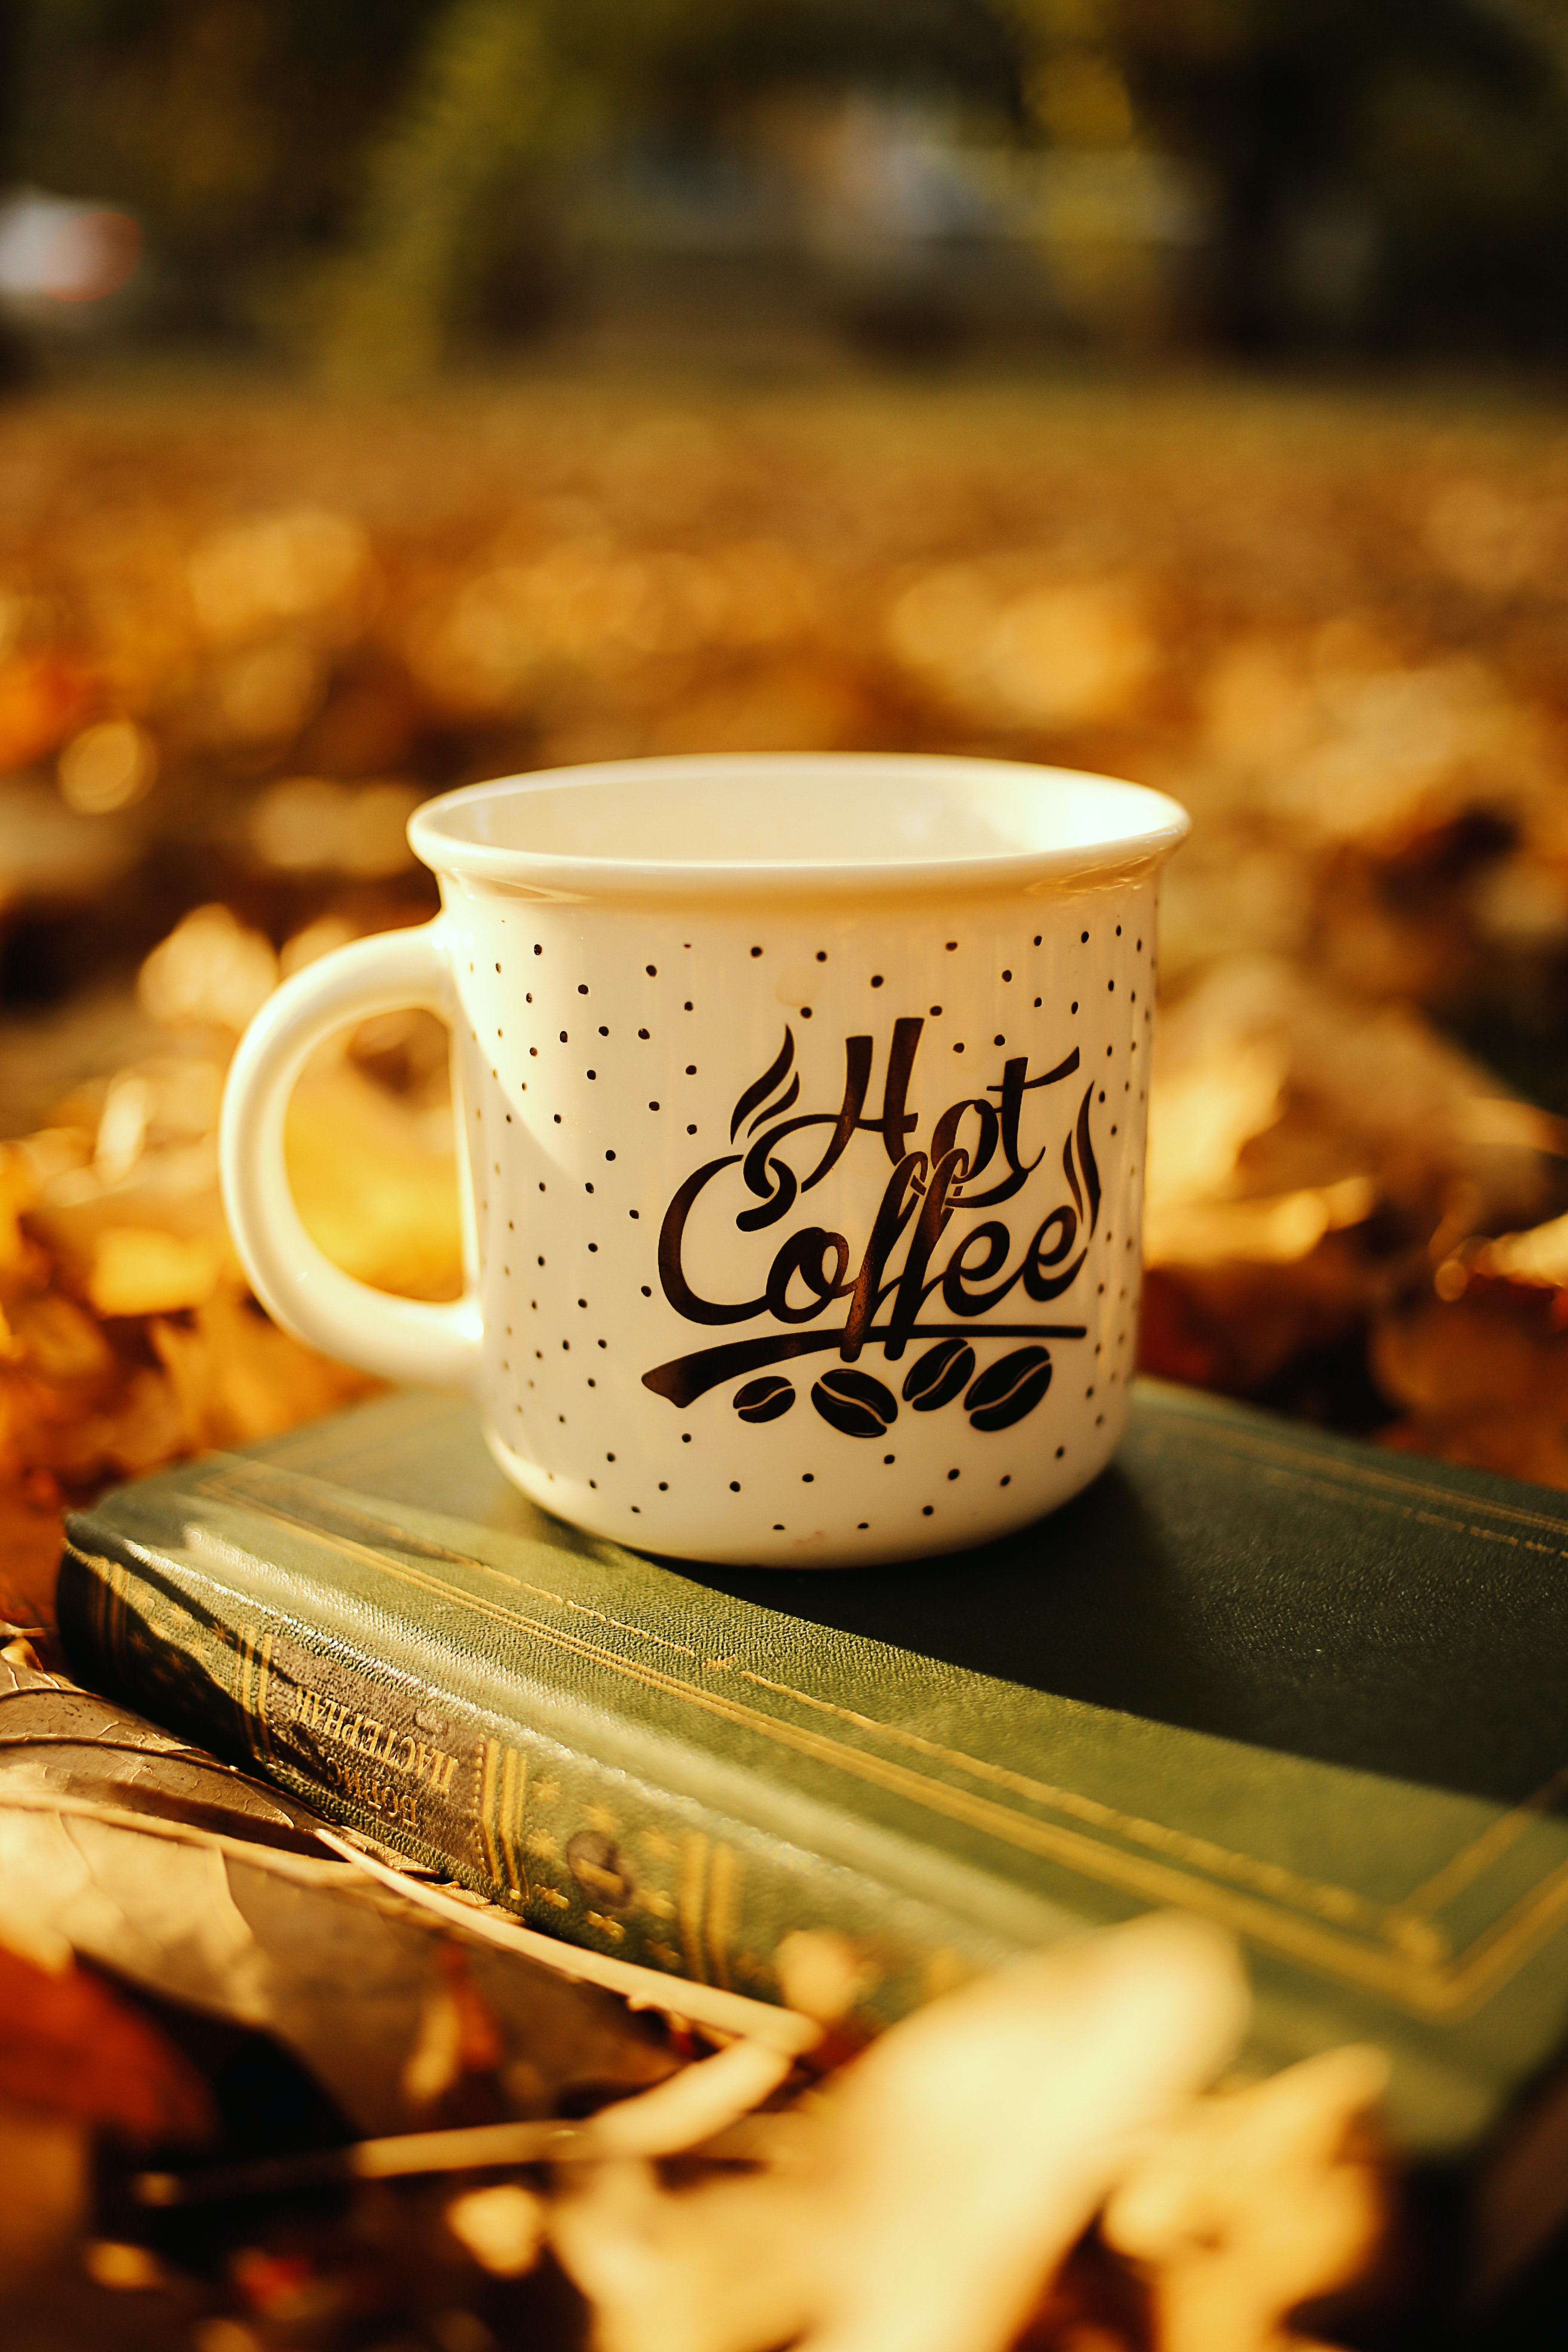 mug, book, coffee, words, cup, inscription cell phone wallpapers